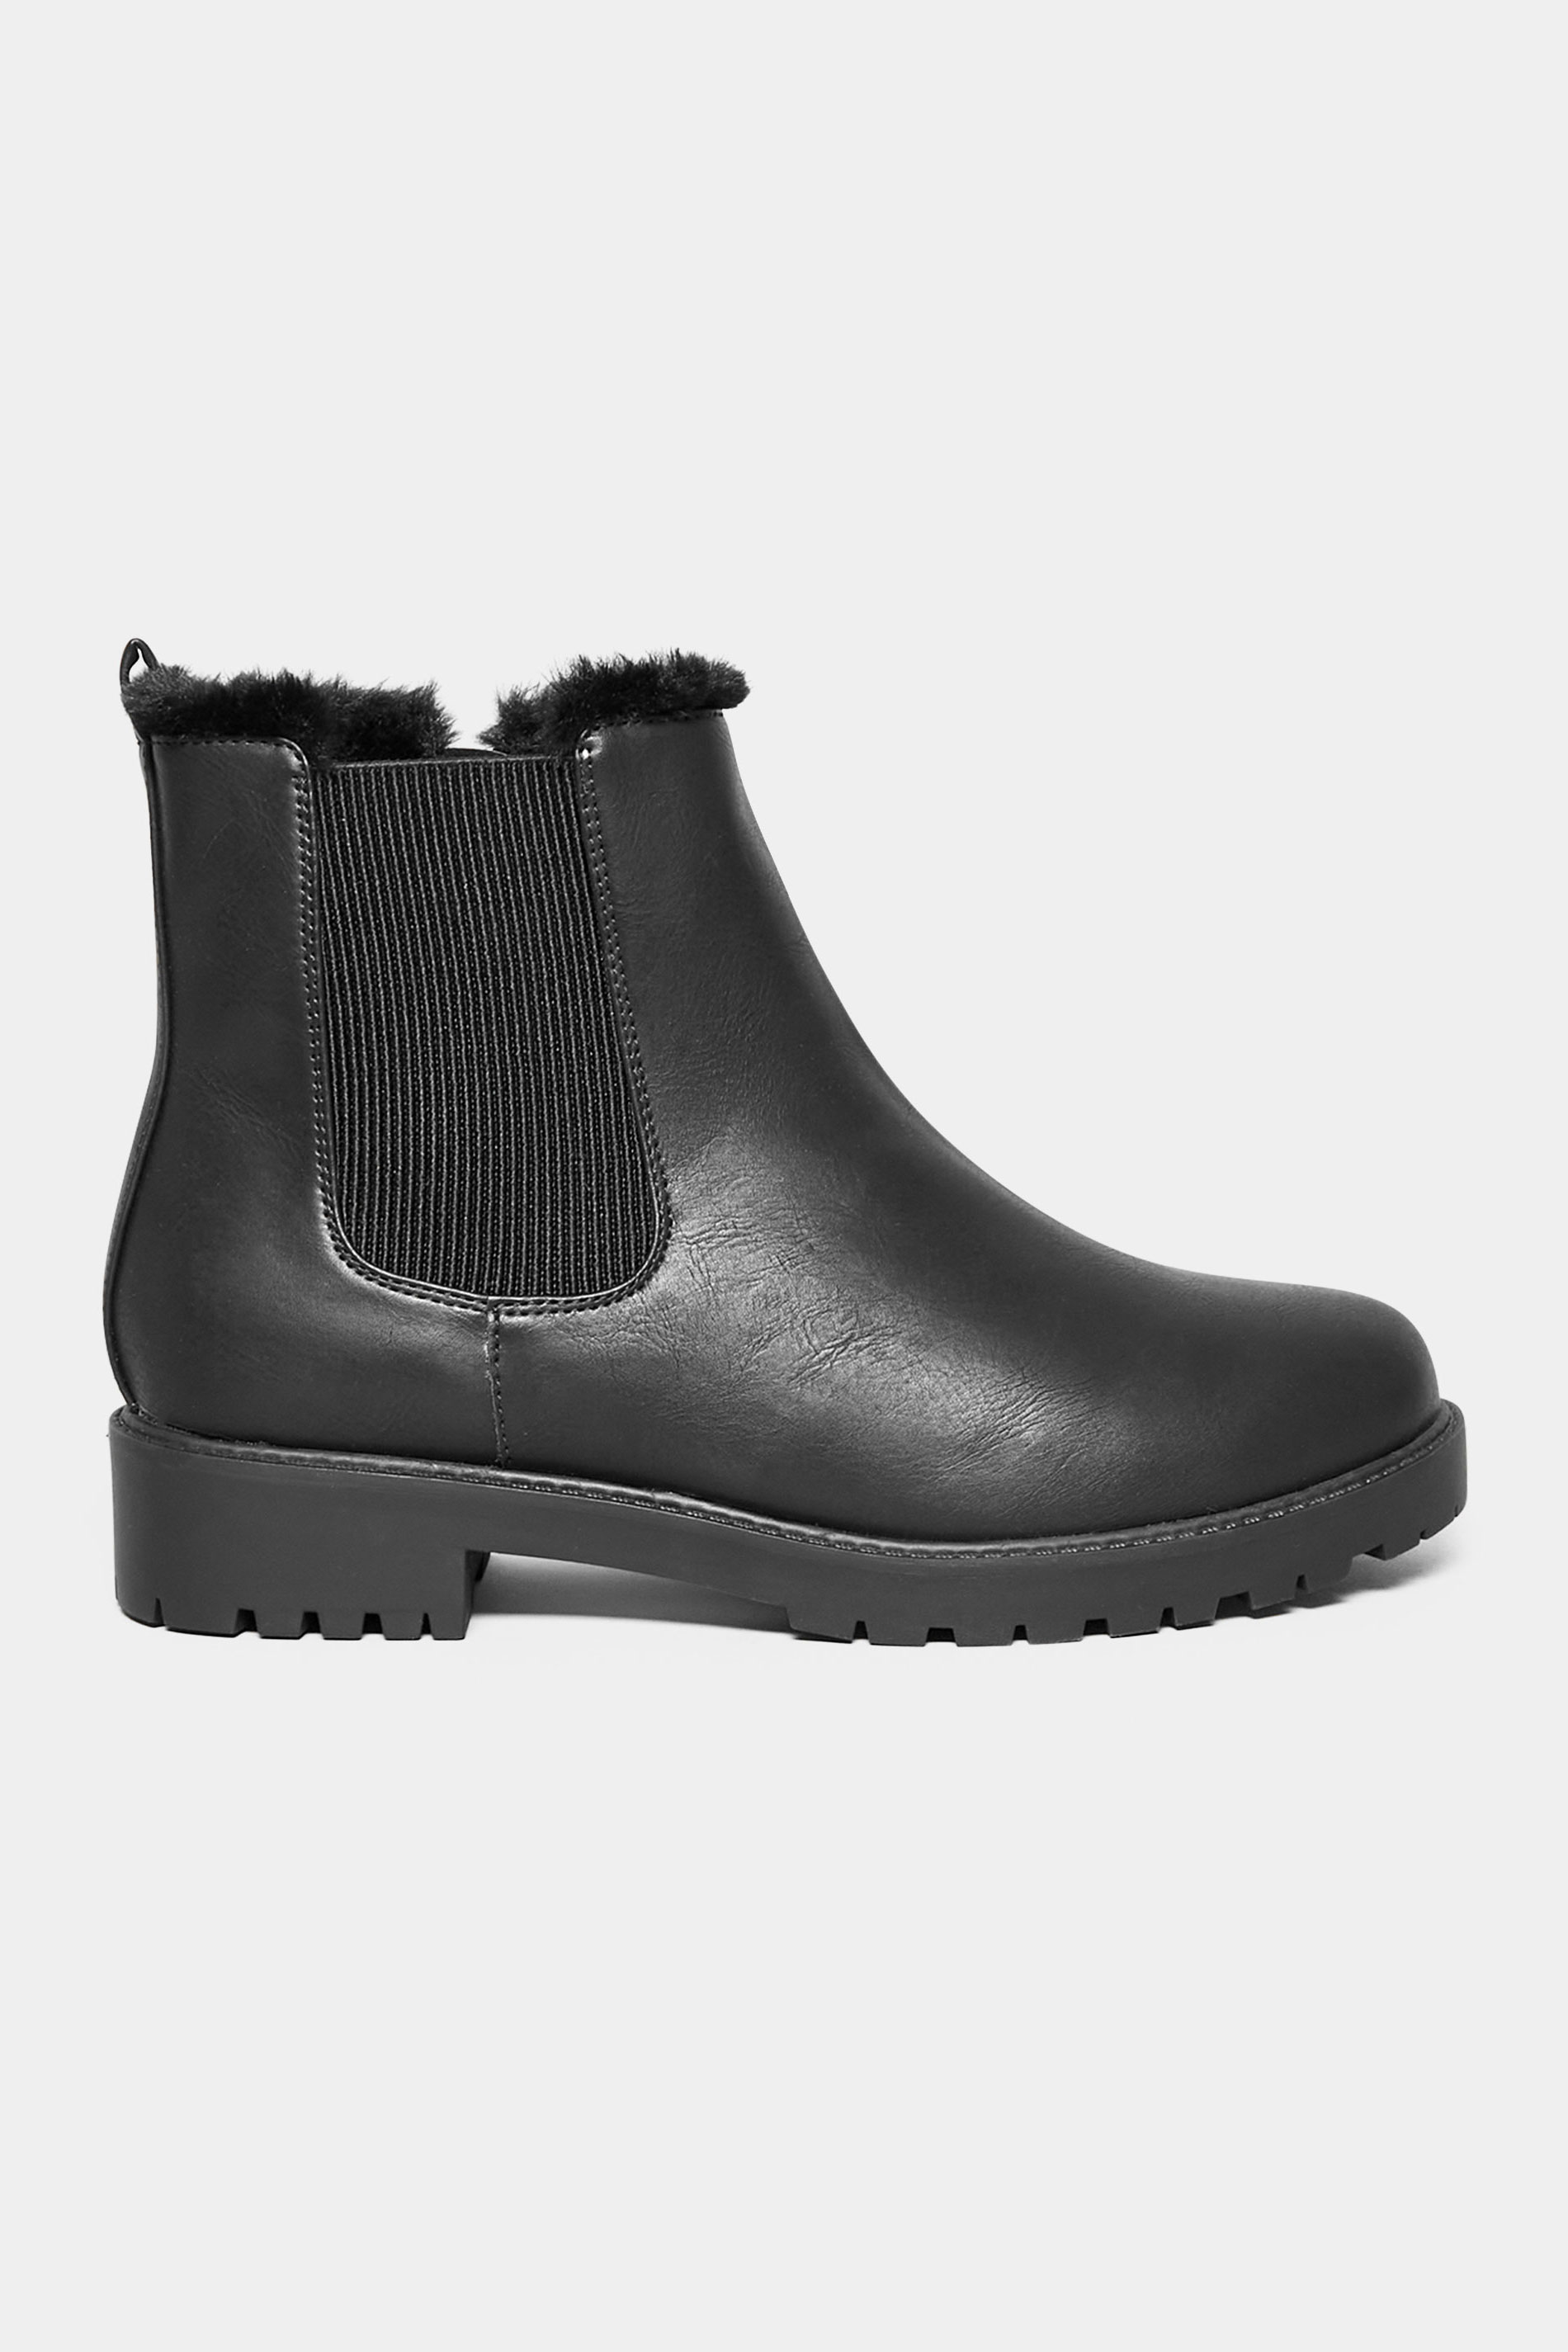 Black Faux Fur Chelsea Boots In Wide E Fit & Wide EEE Fit | Yours Clothing 3